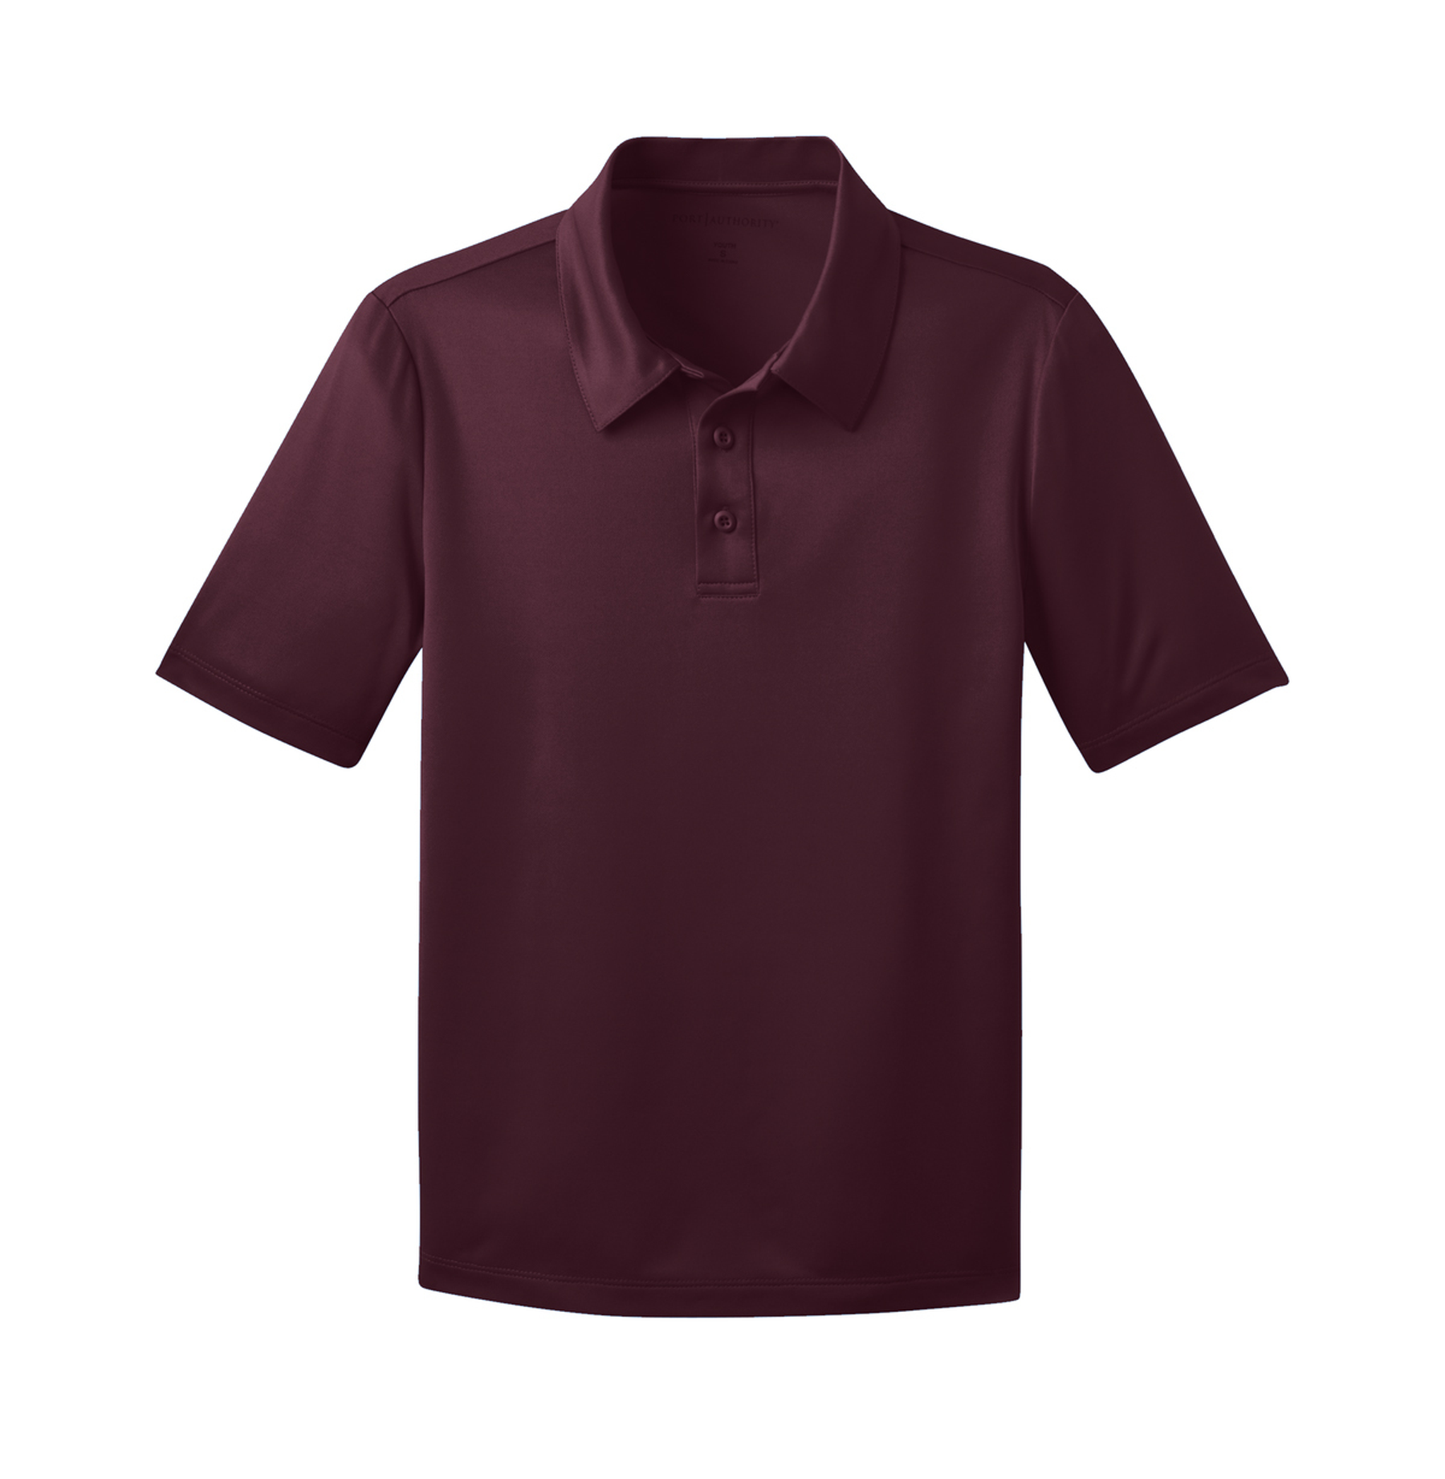 Port Authority® Youth Silk Touch™ Performance Polo